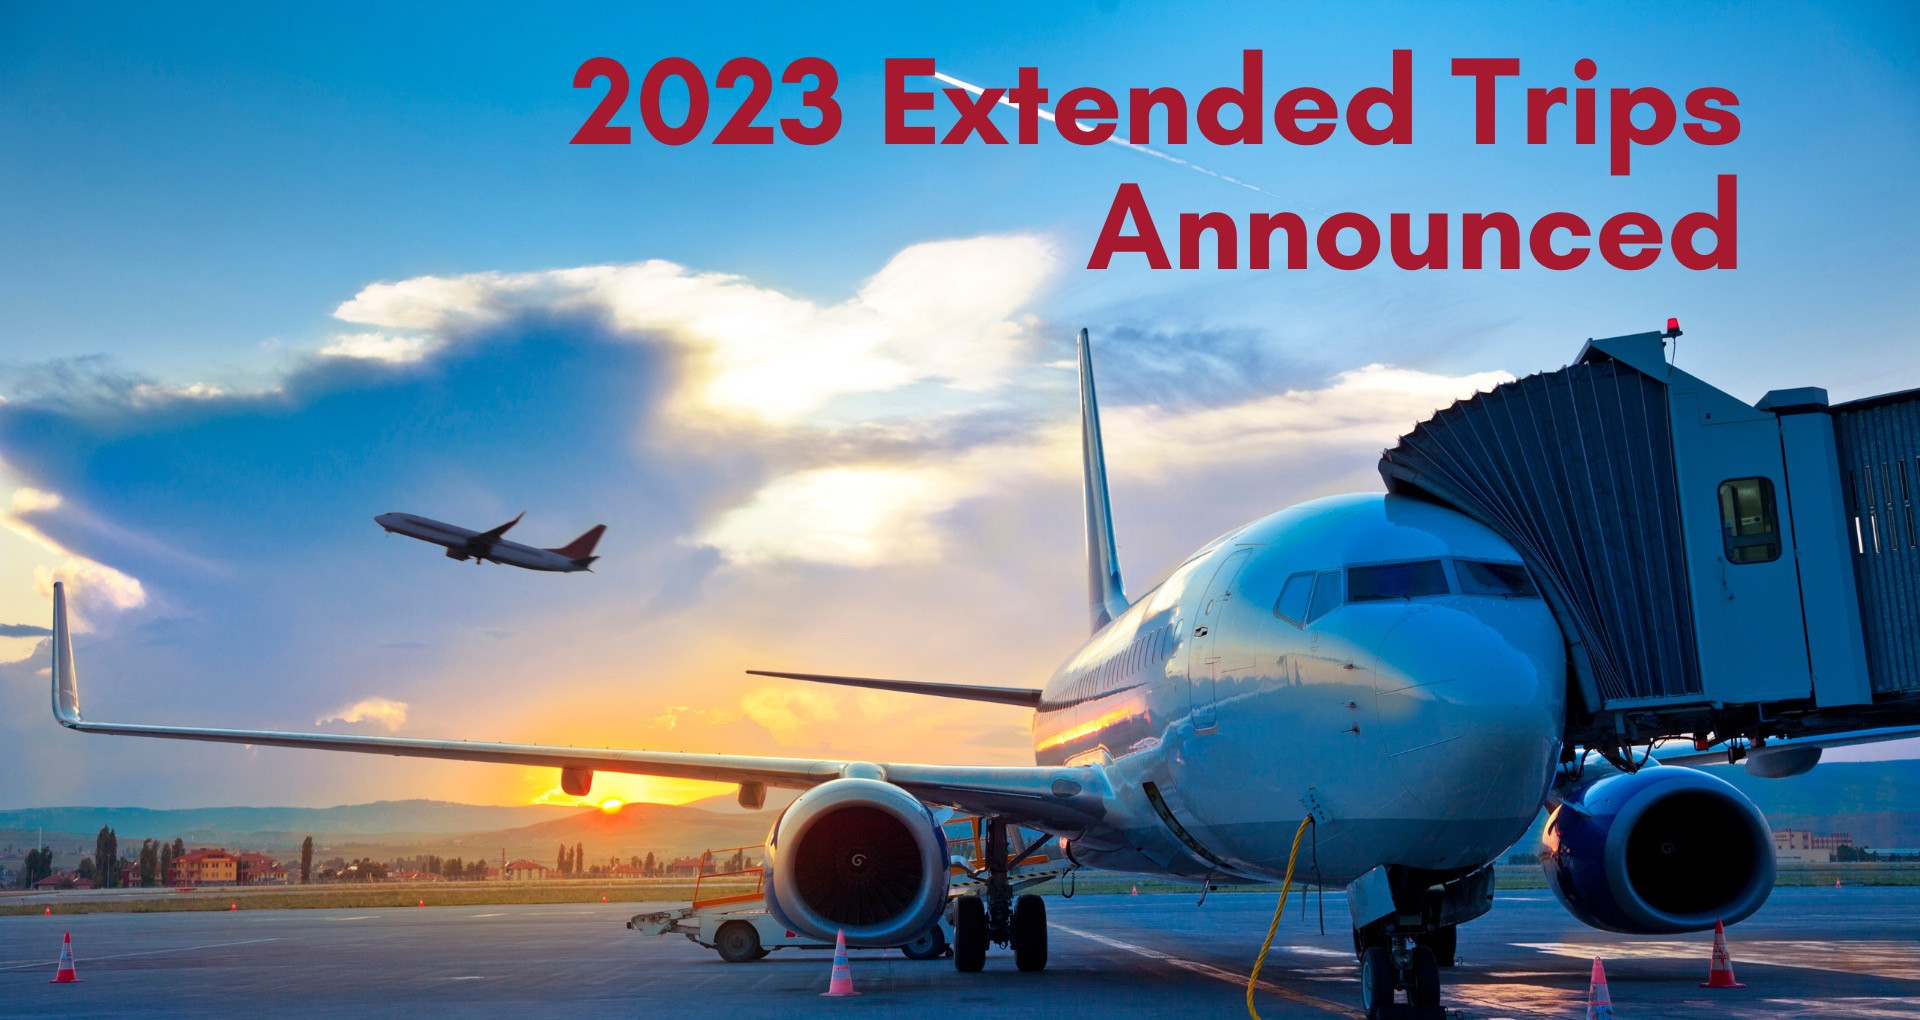 2023 Extended Trips Announced